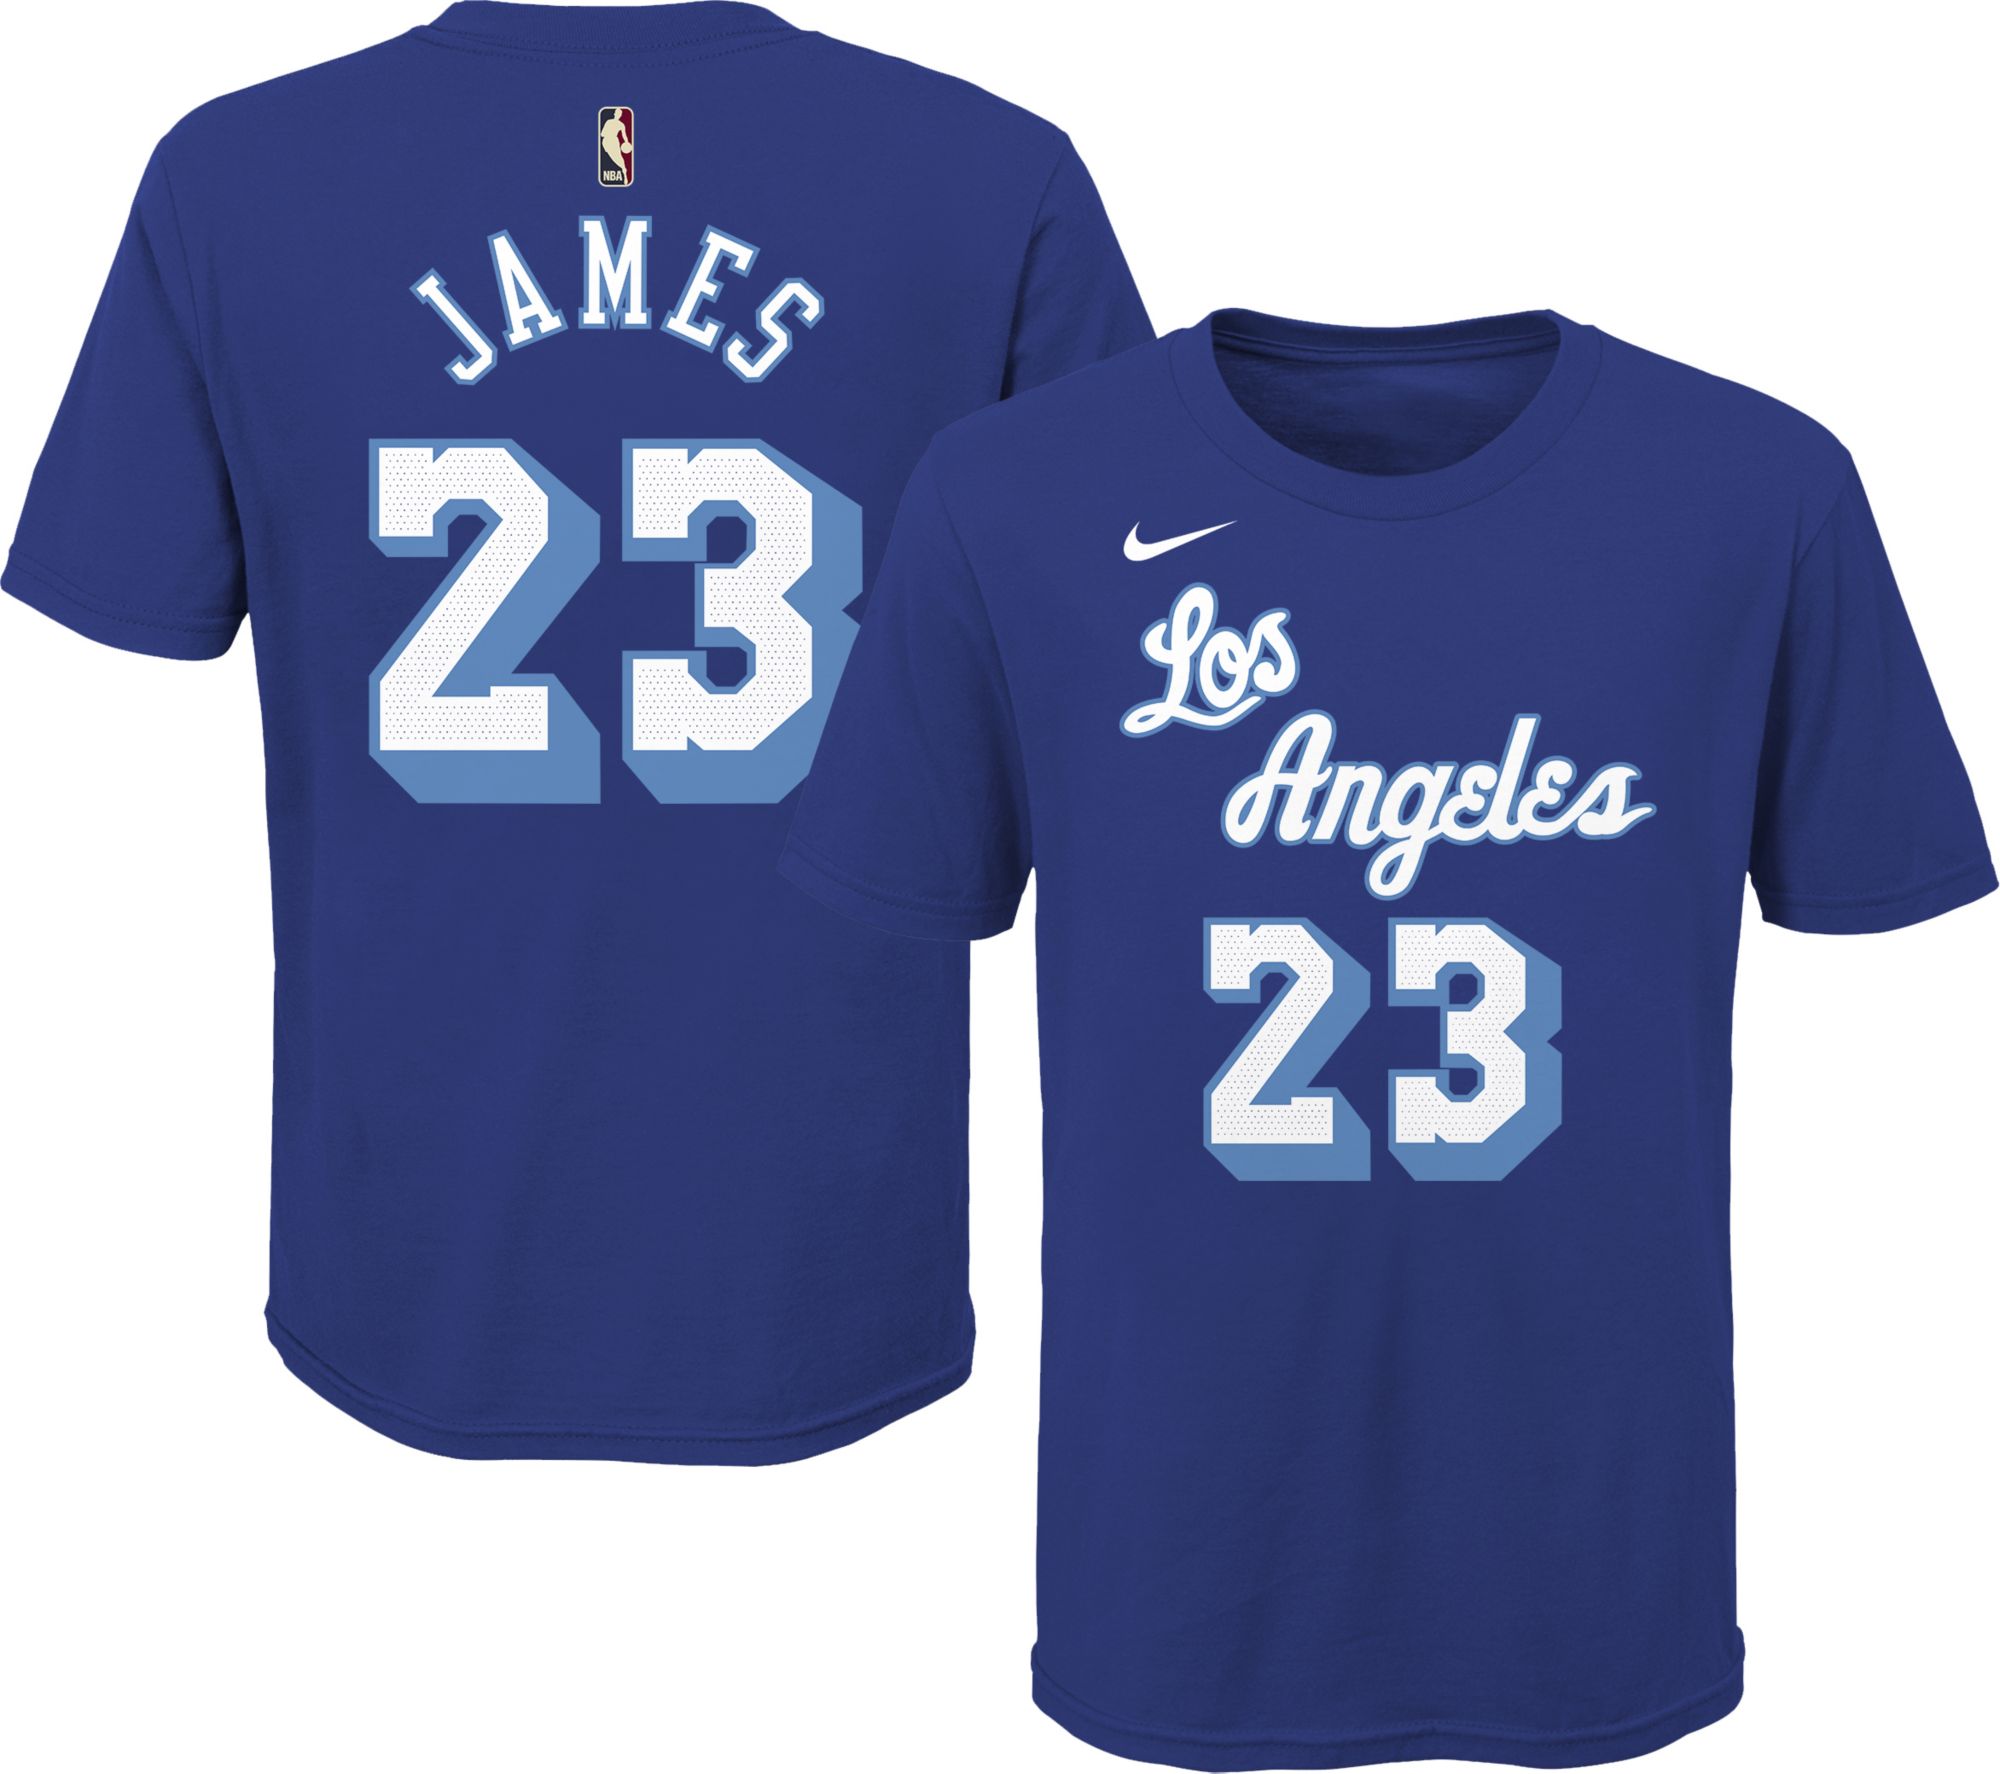 Nike Los Angeles Dodgers Cody Bellinger #35 Jersey Boys Youth